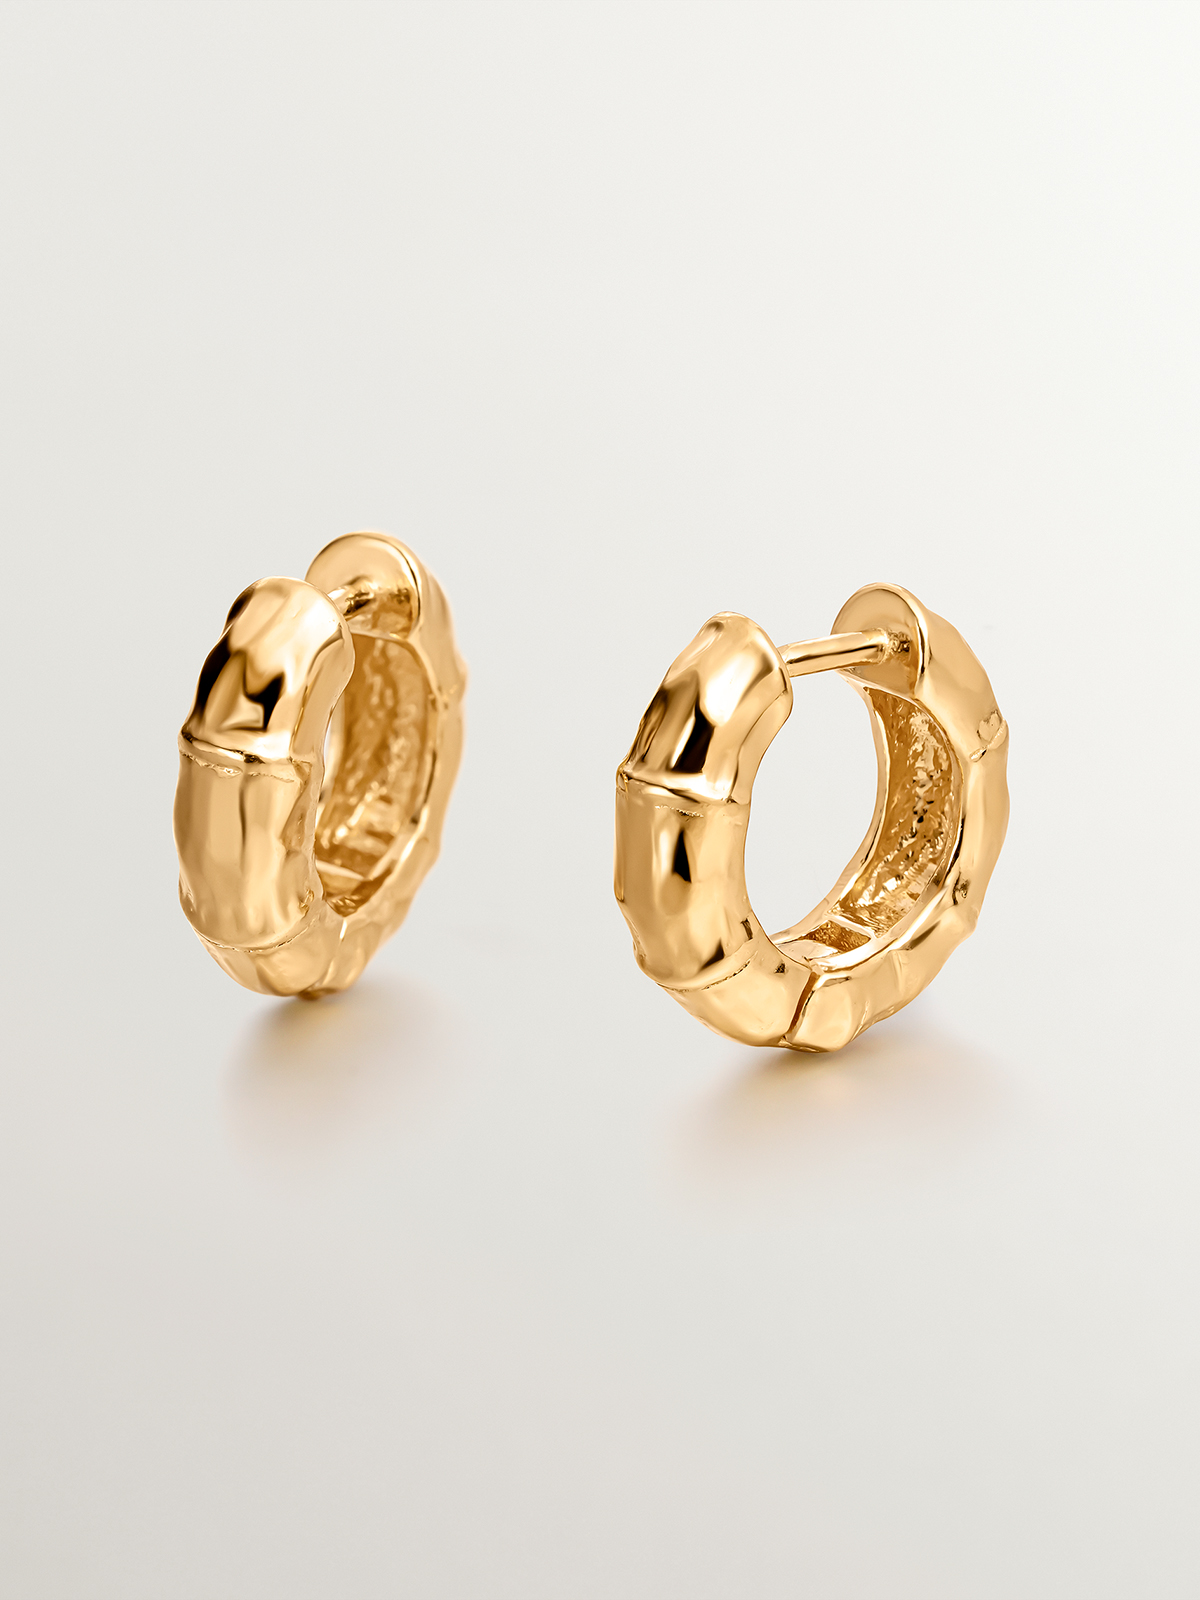 Small hoop earrings made of 925 silver, bathed in 18K yellow gold with a bamboo texture.